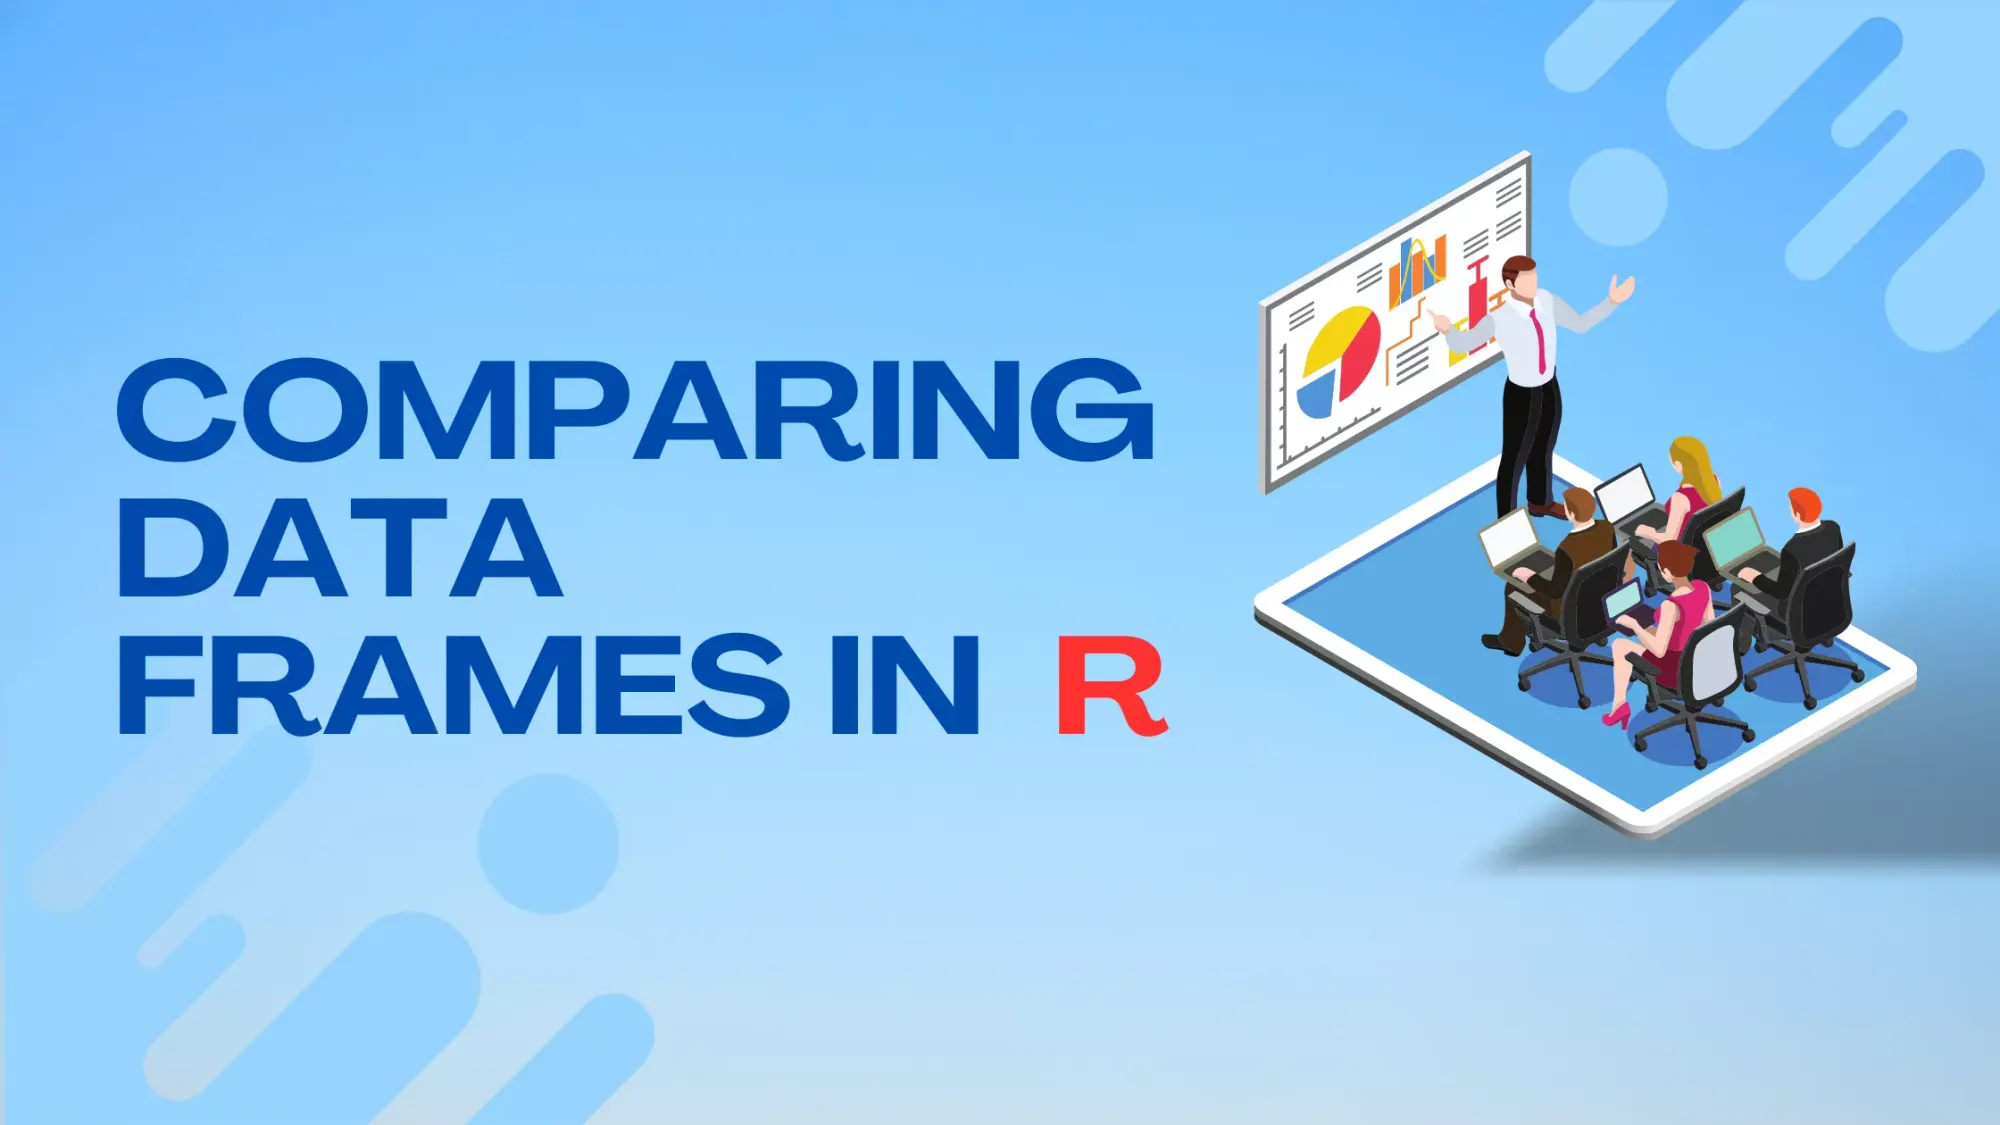 How to Compare Data Frames in R